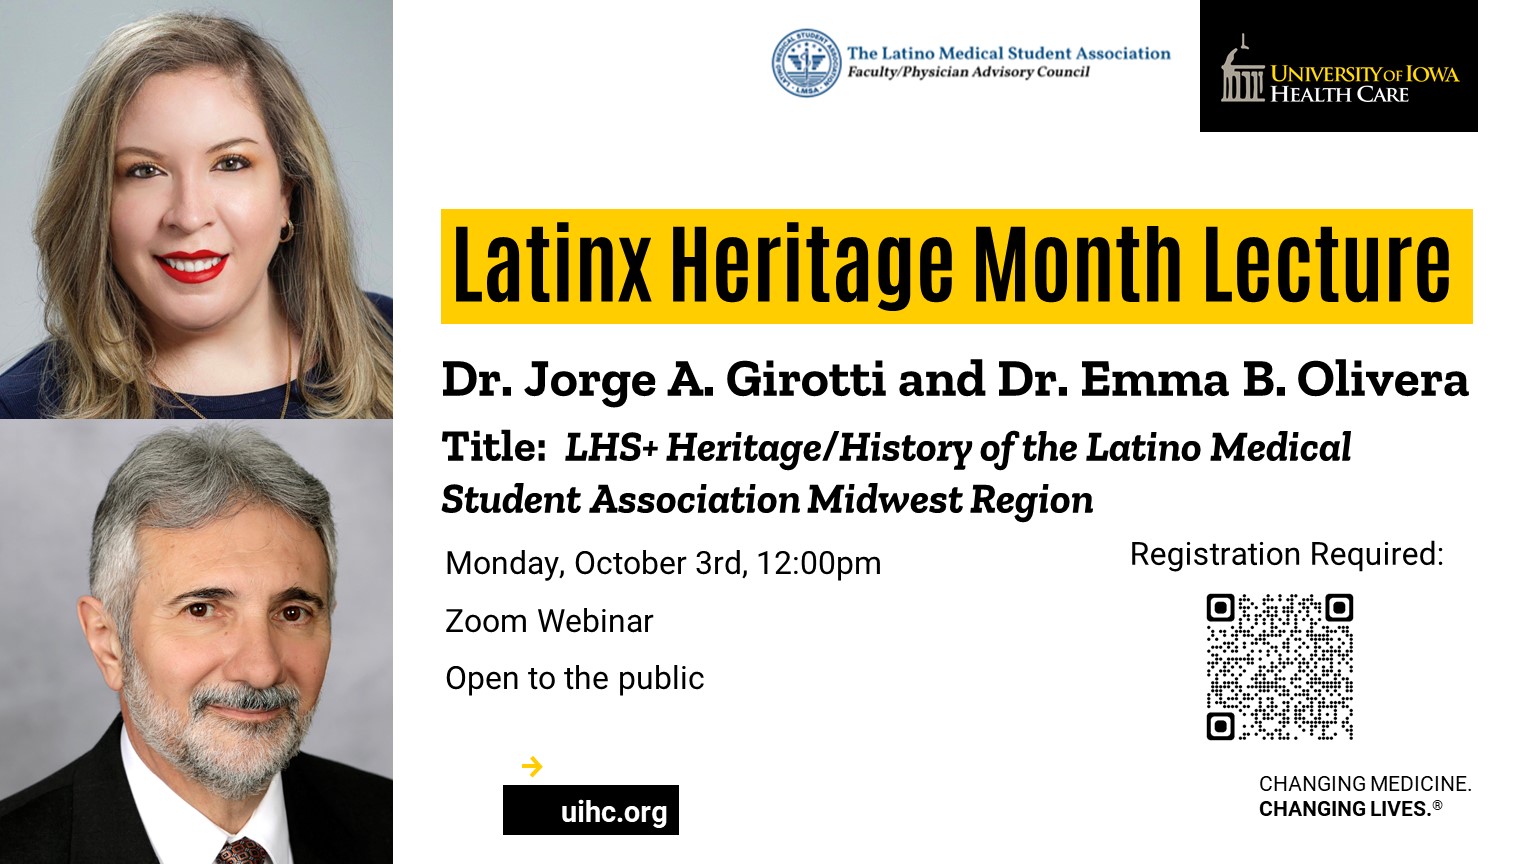 UI Health Care Latinx Heritage Month Lecture - LHS+ Heritage/History of the Latino Medical Student Association Midwest Region promotional image